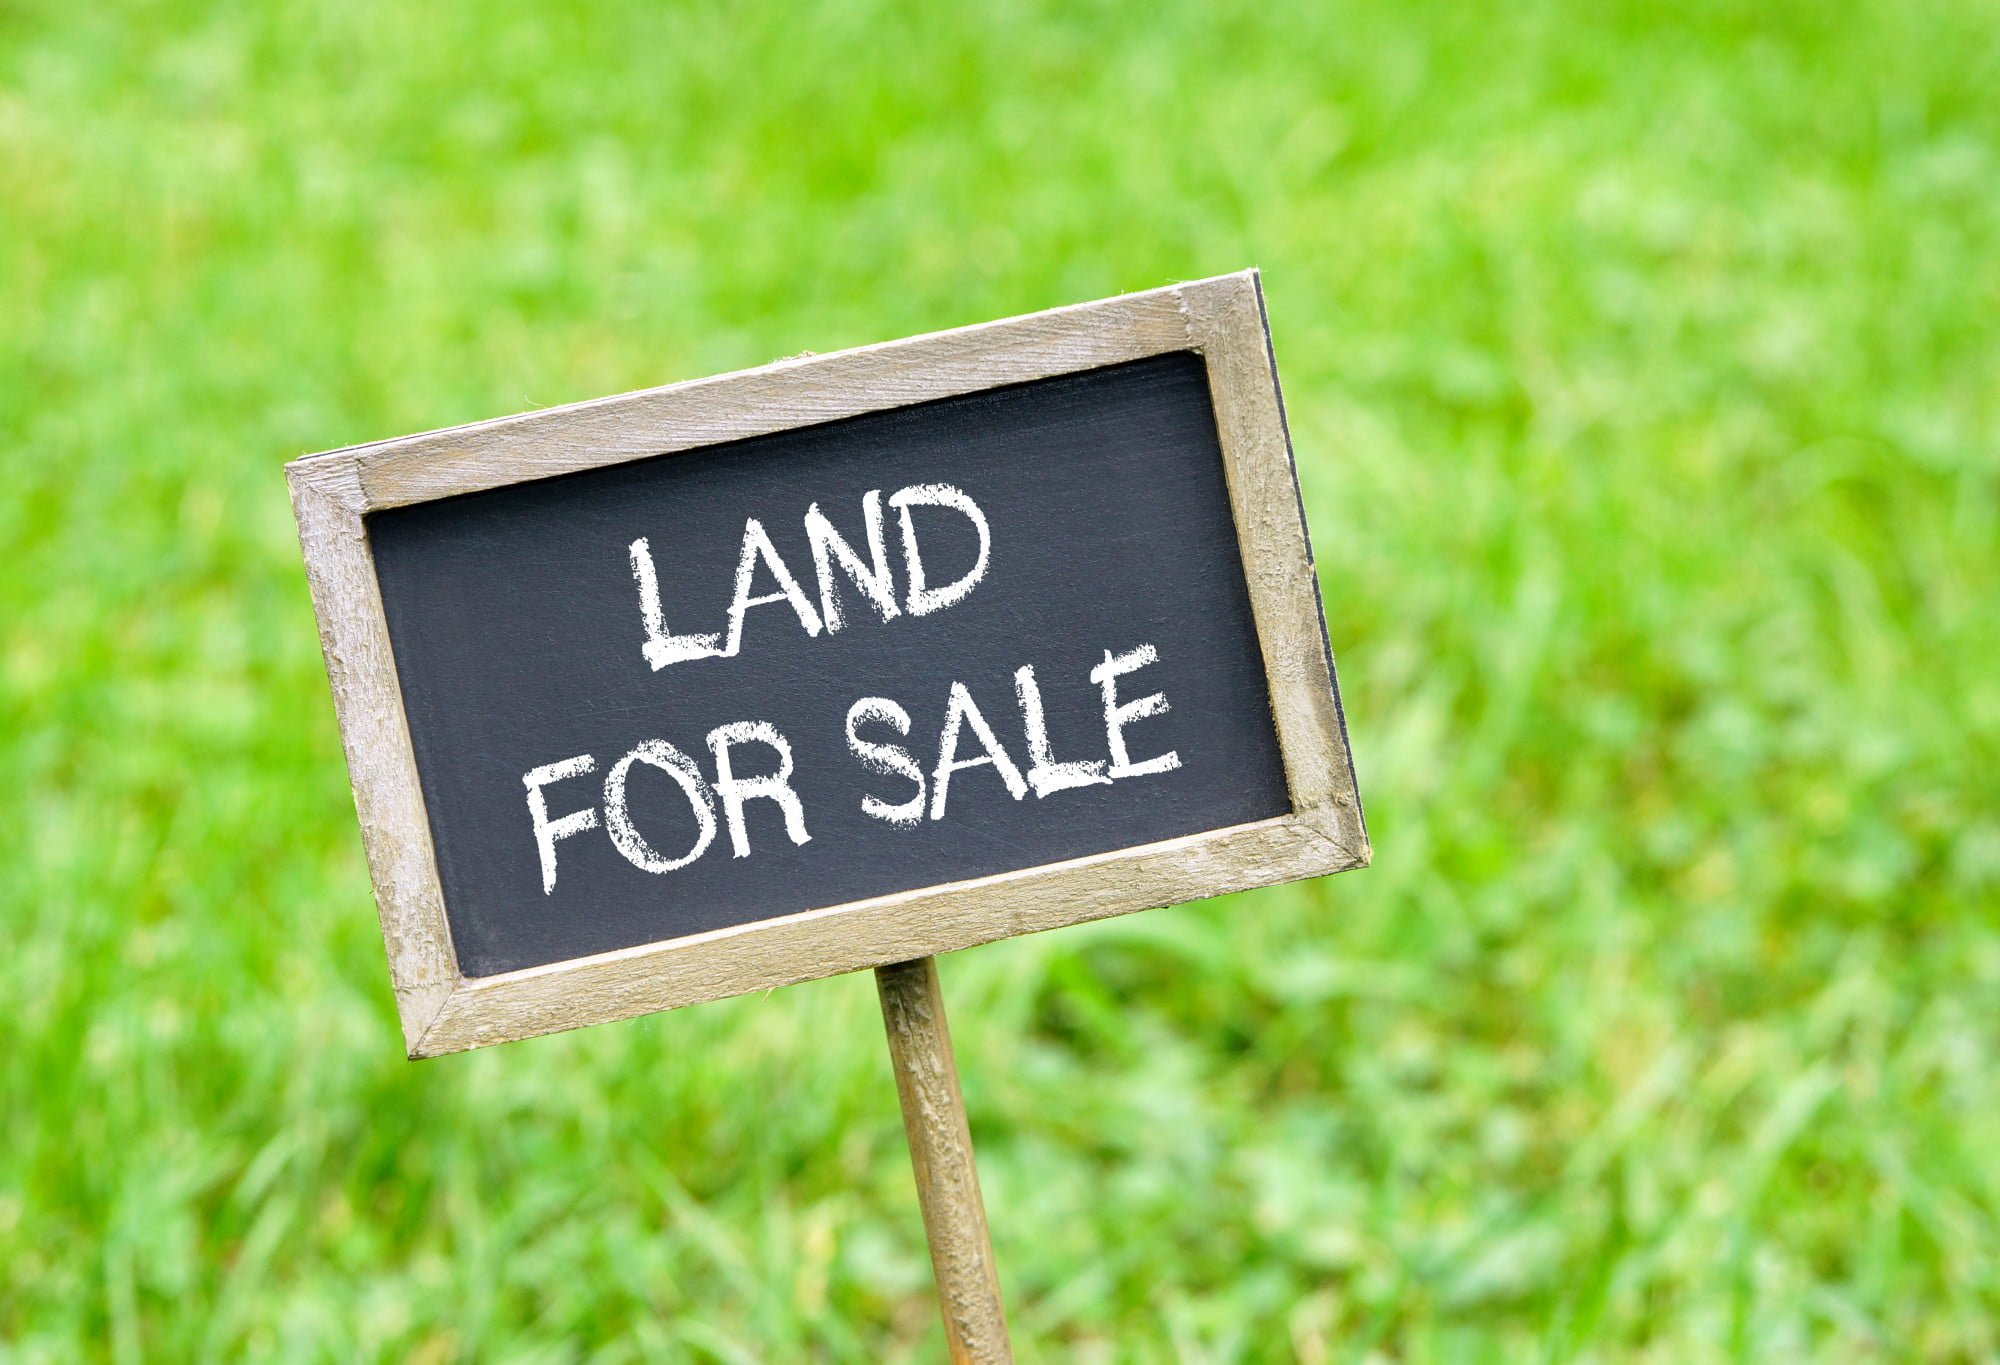 Keep reading if you're on the fence about purchasing a plot of vacant land. We're giving you a few benefits you can gain from this real estate investment.